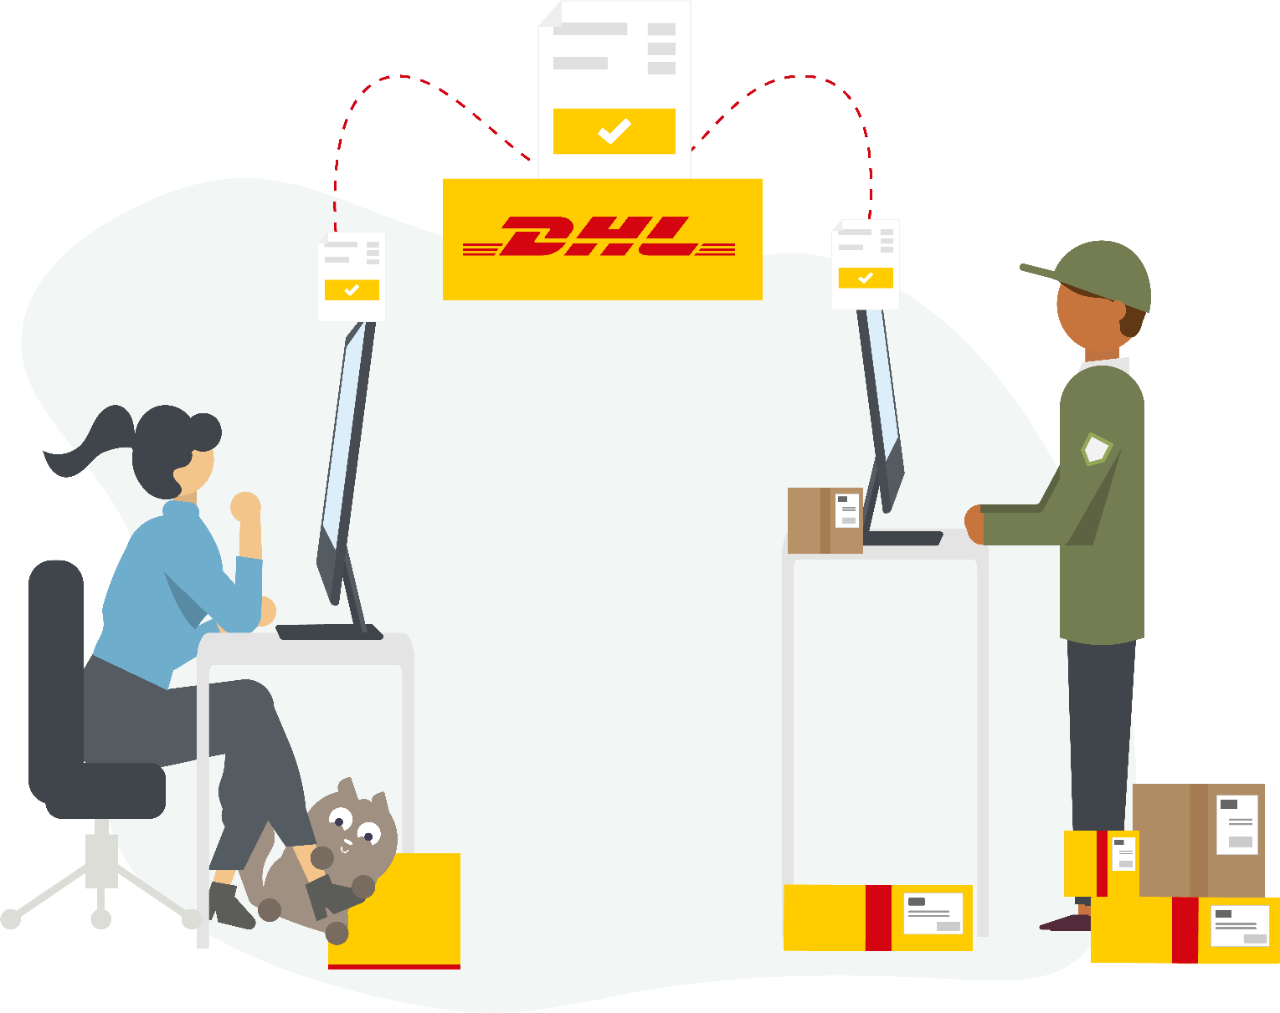 DHL transmitting shipment information to customs authorities